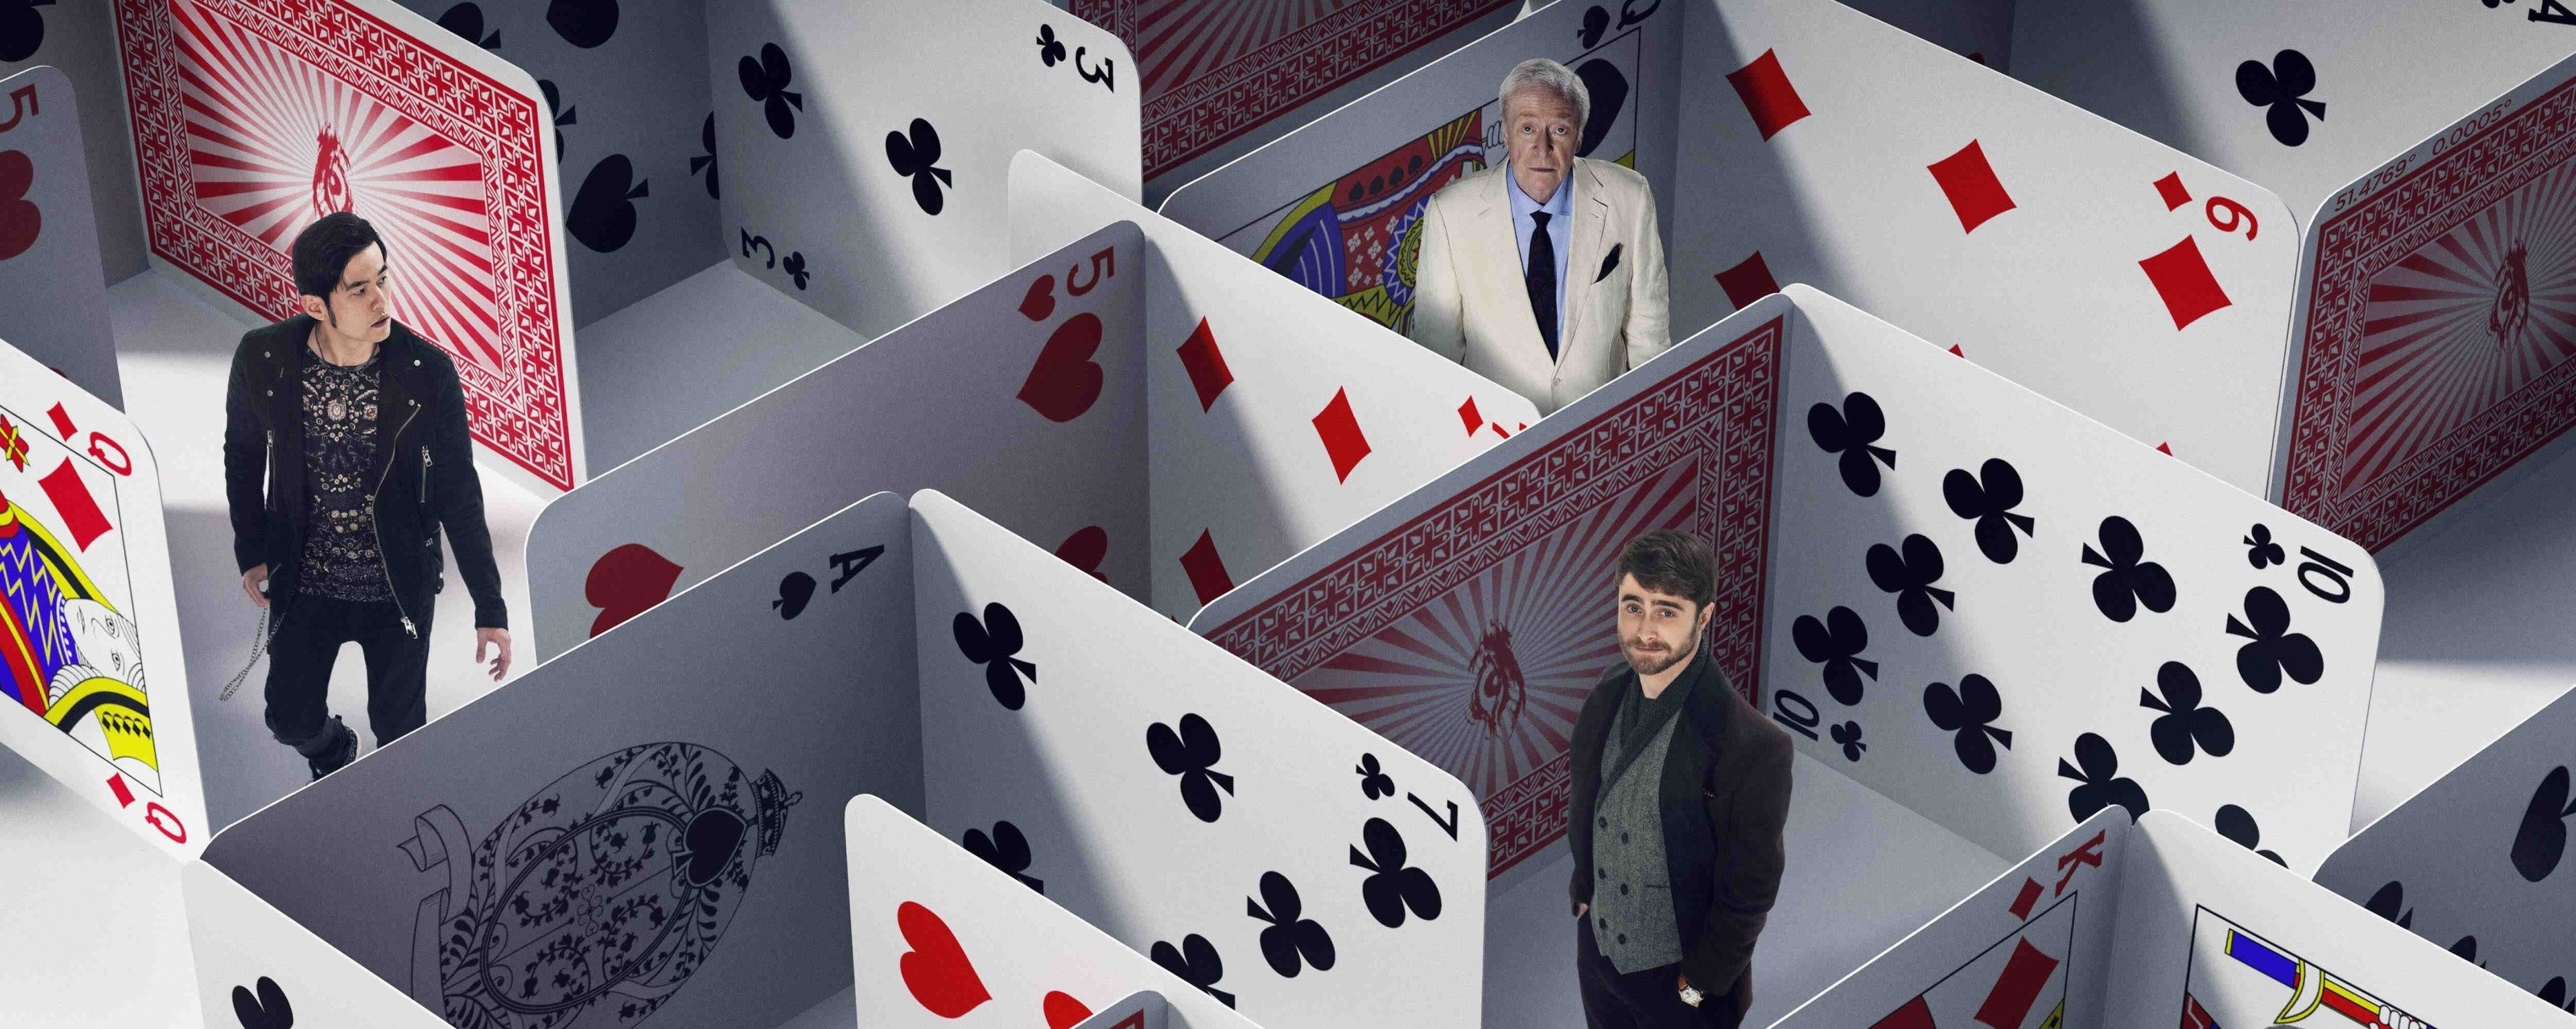 Now You See Me 2 wallpaper, Ethan Cunningham's post, Fan-made artwork, Captivating visuals, 3840x1540 Dual Screen Desktop